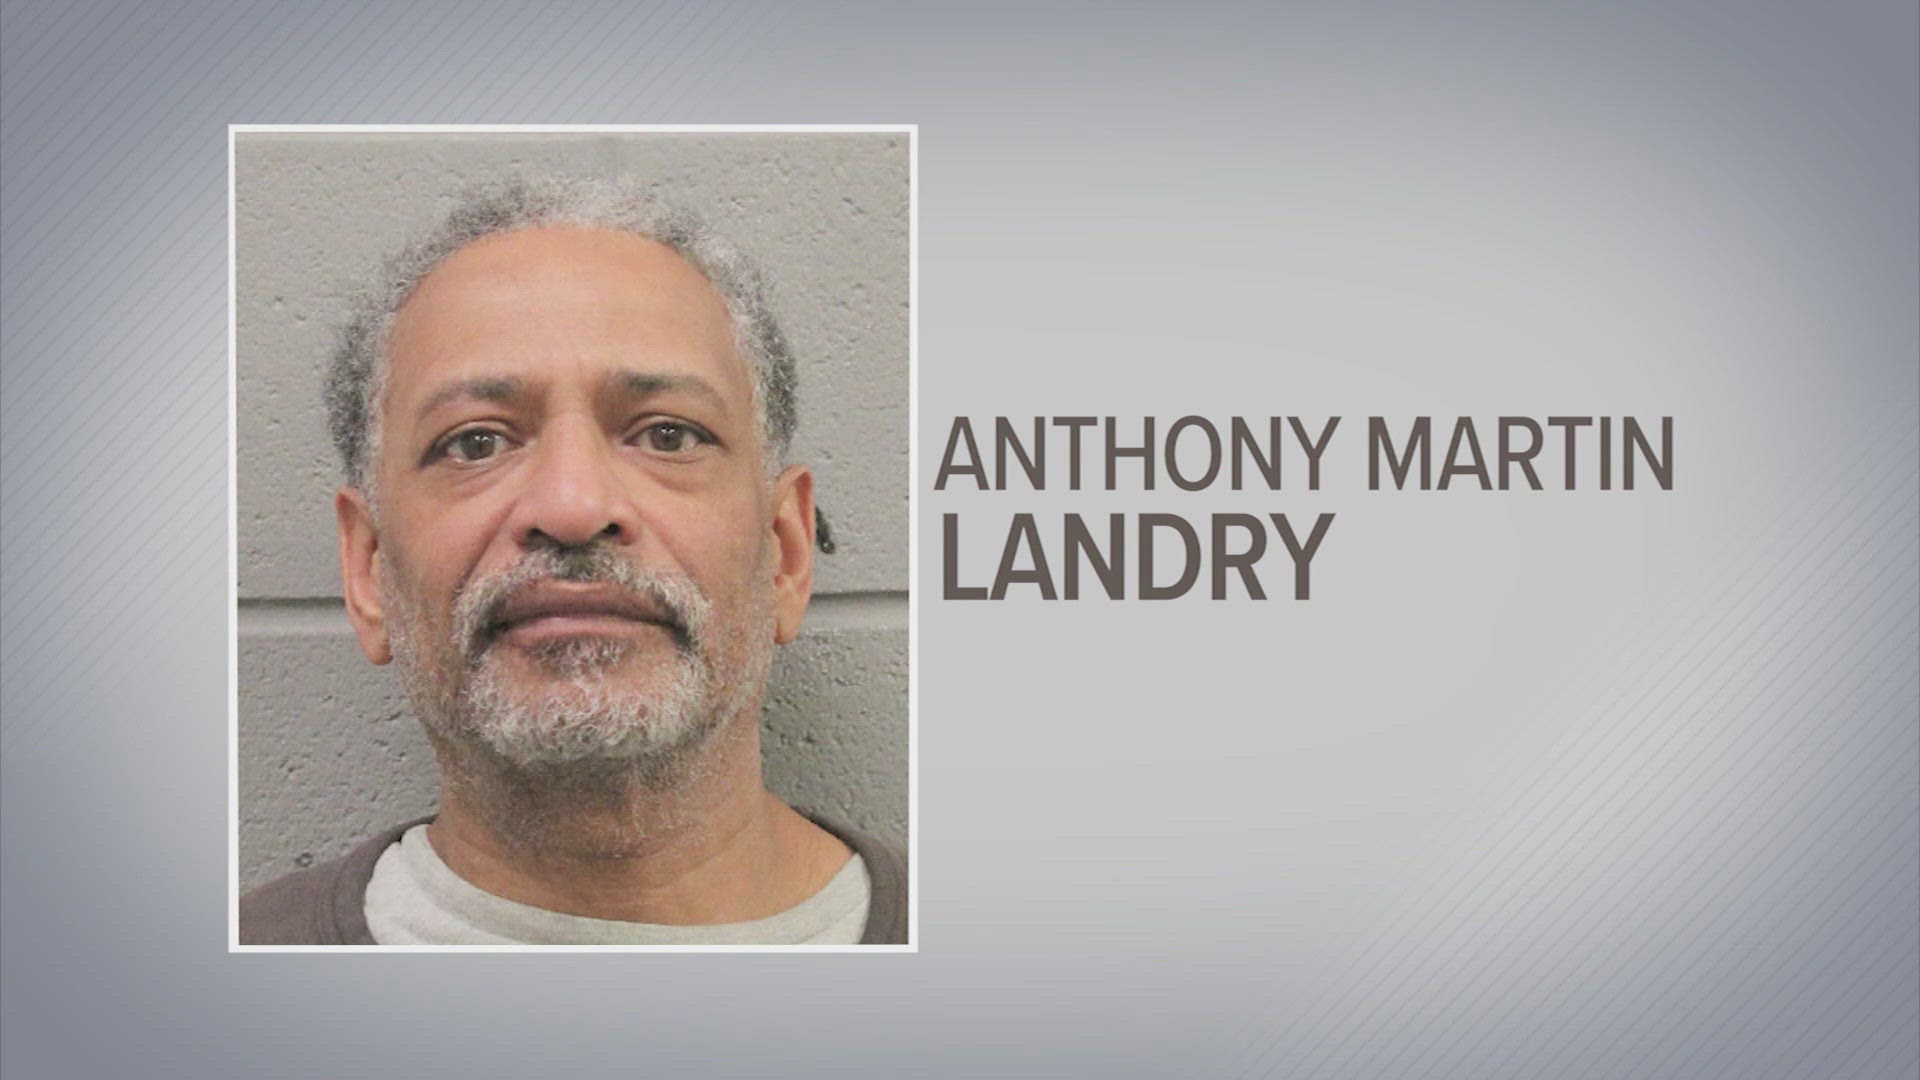 Court documents reveal new details after a man was arrested in connection with the death of a Houston attorney.